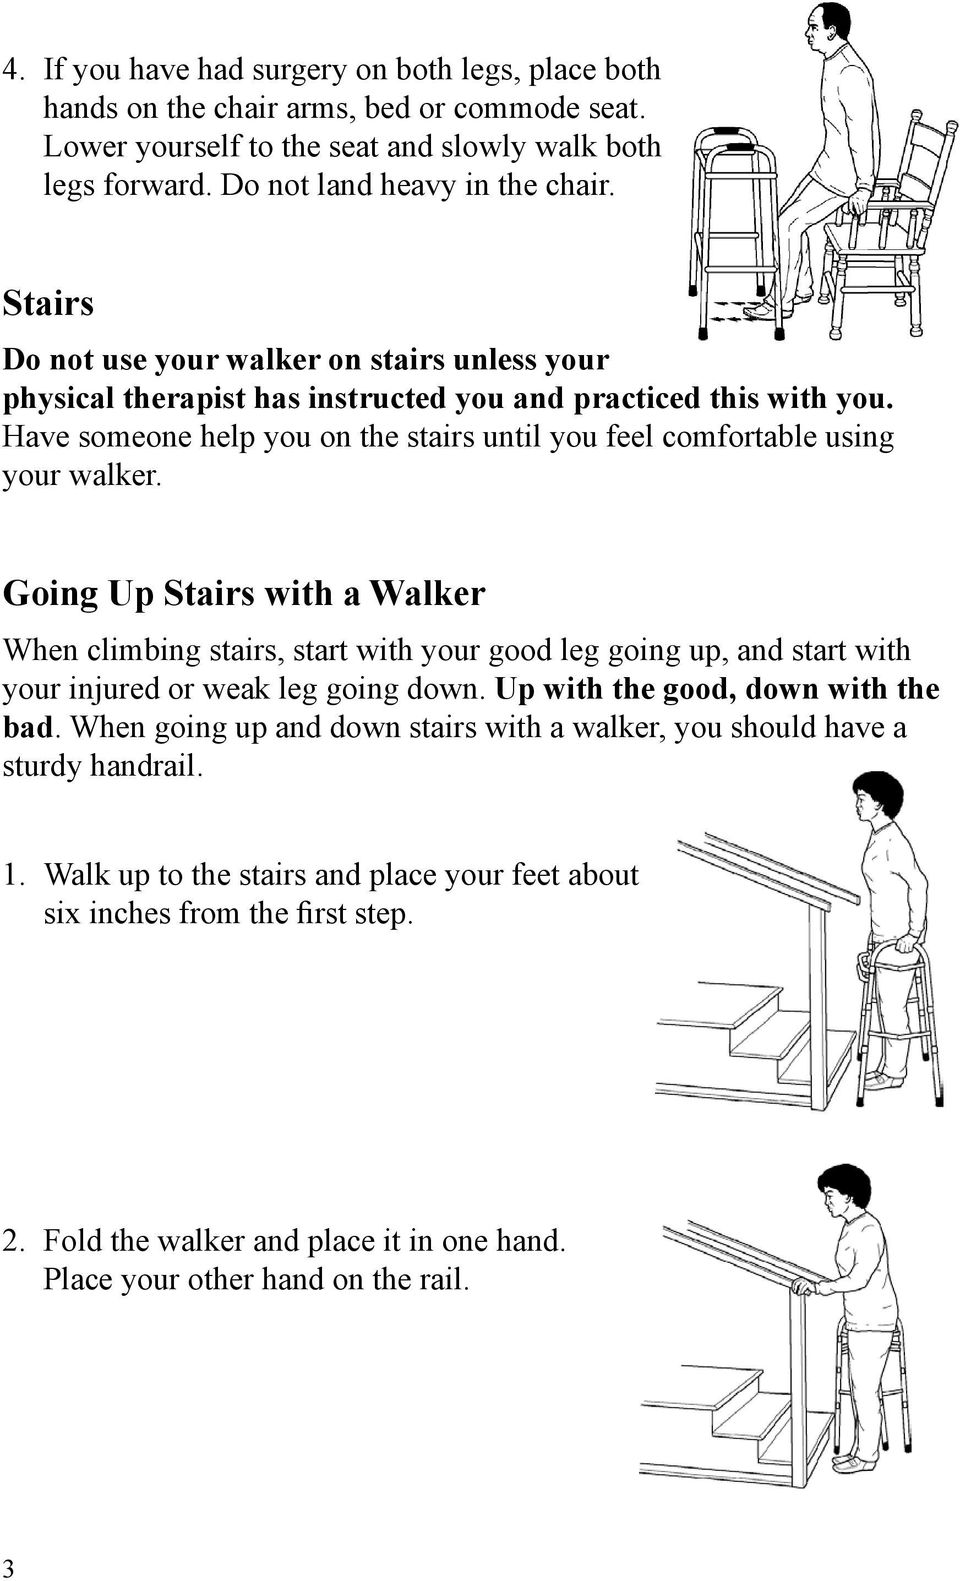 Going Up Stairs with a Walker When climbing stairs, start with your good leg going up, and start with your injured or weak leg going down. Up with the good, down with the bad.